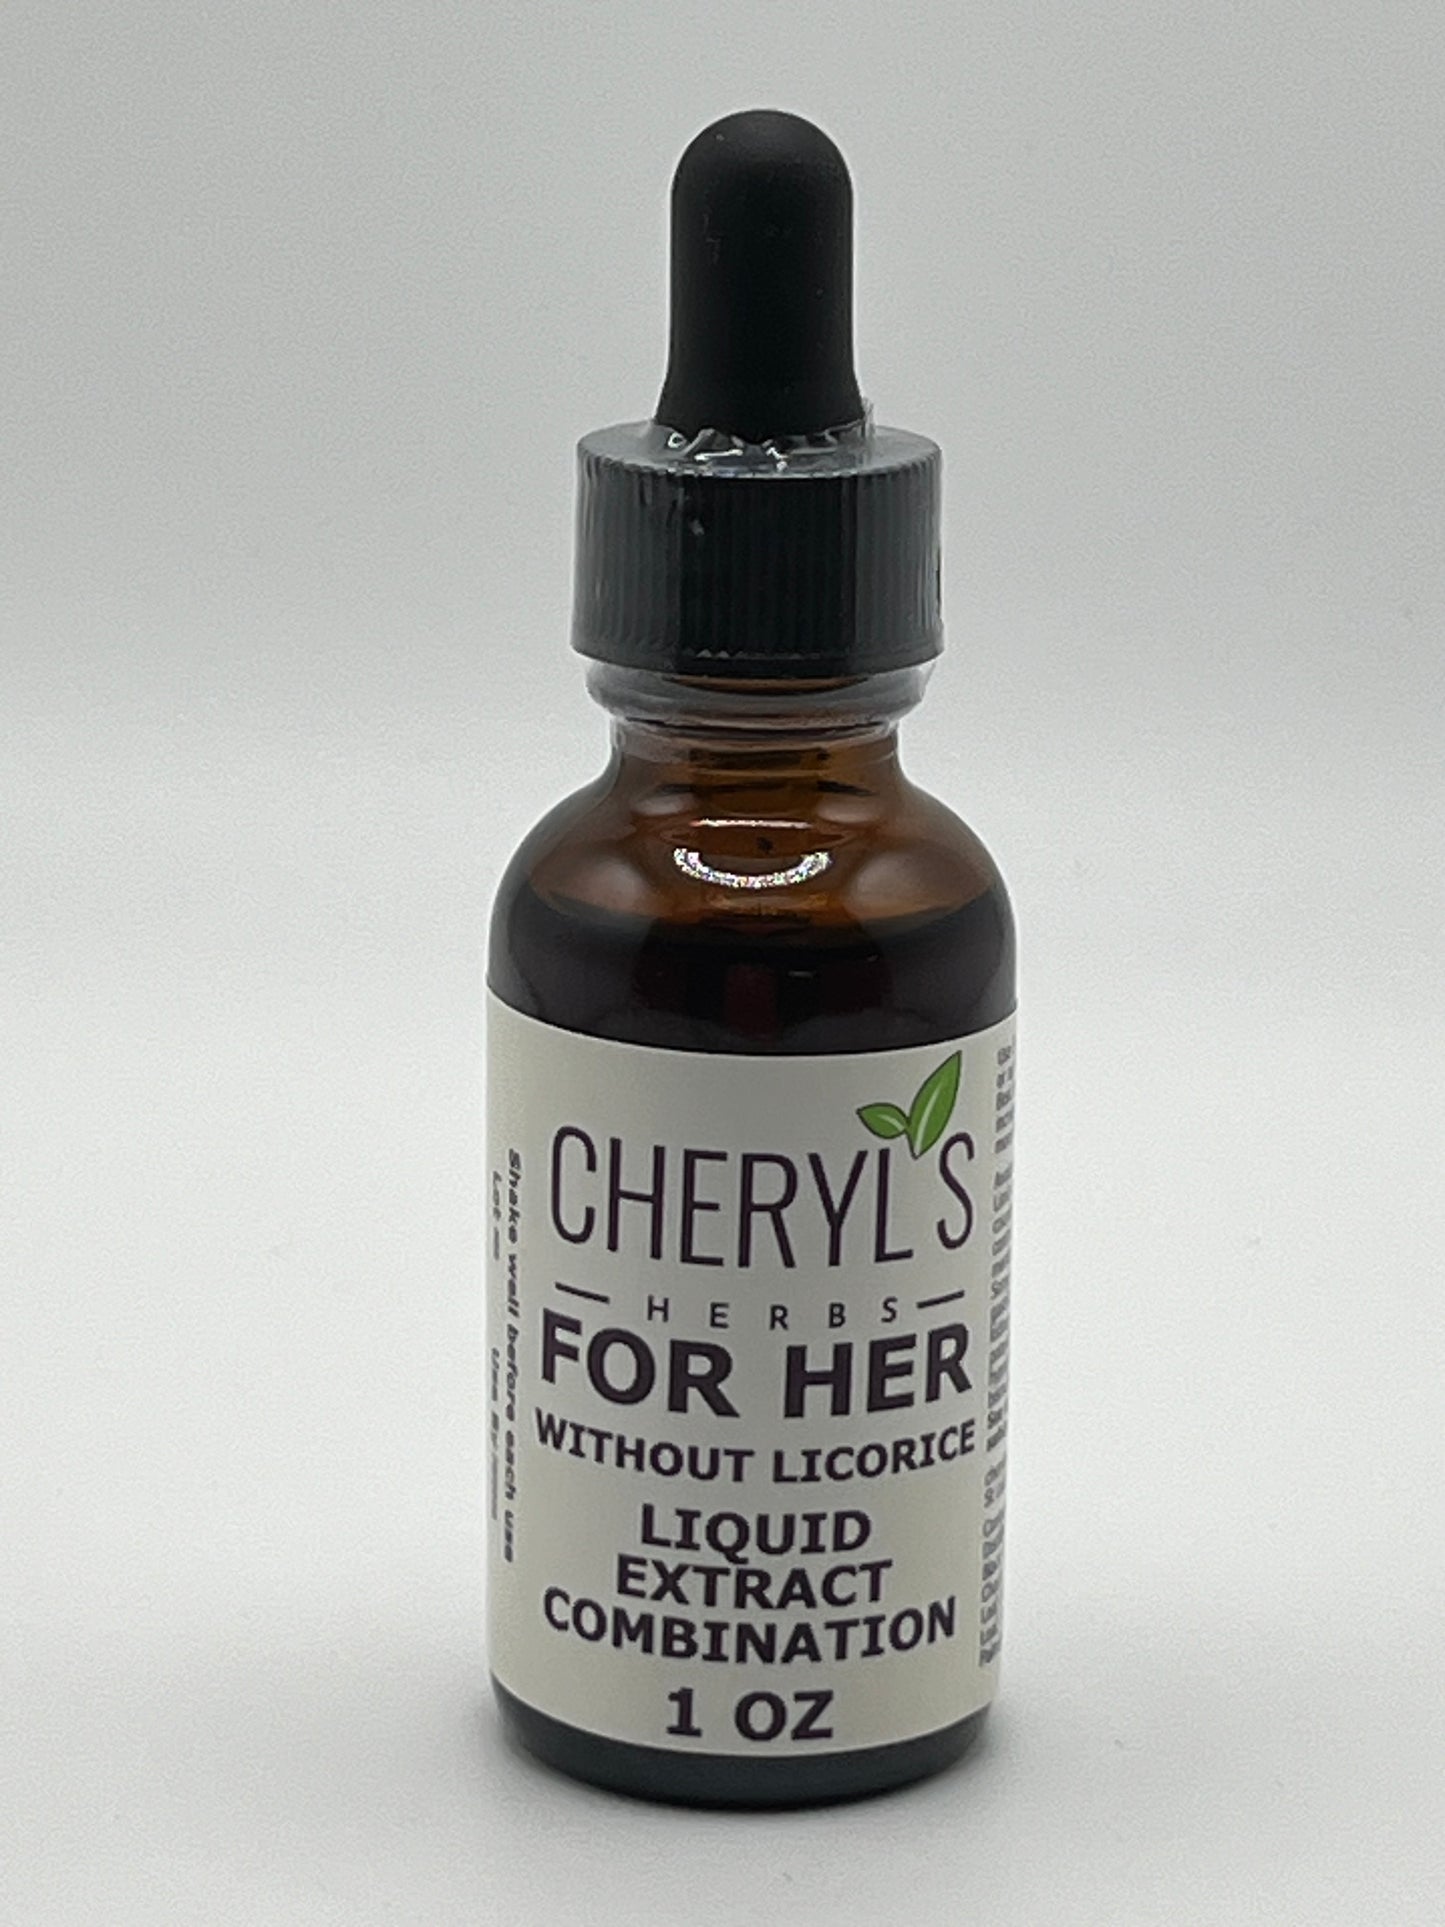 FOR HER WITHOUT LICORICE LIQUID EXTRACT COMBINATION